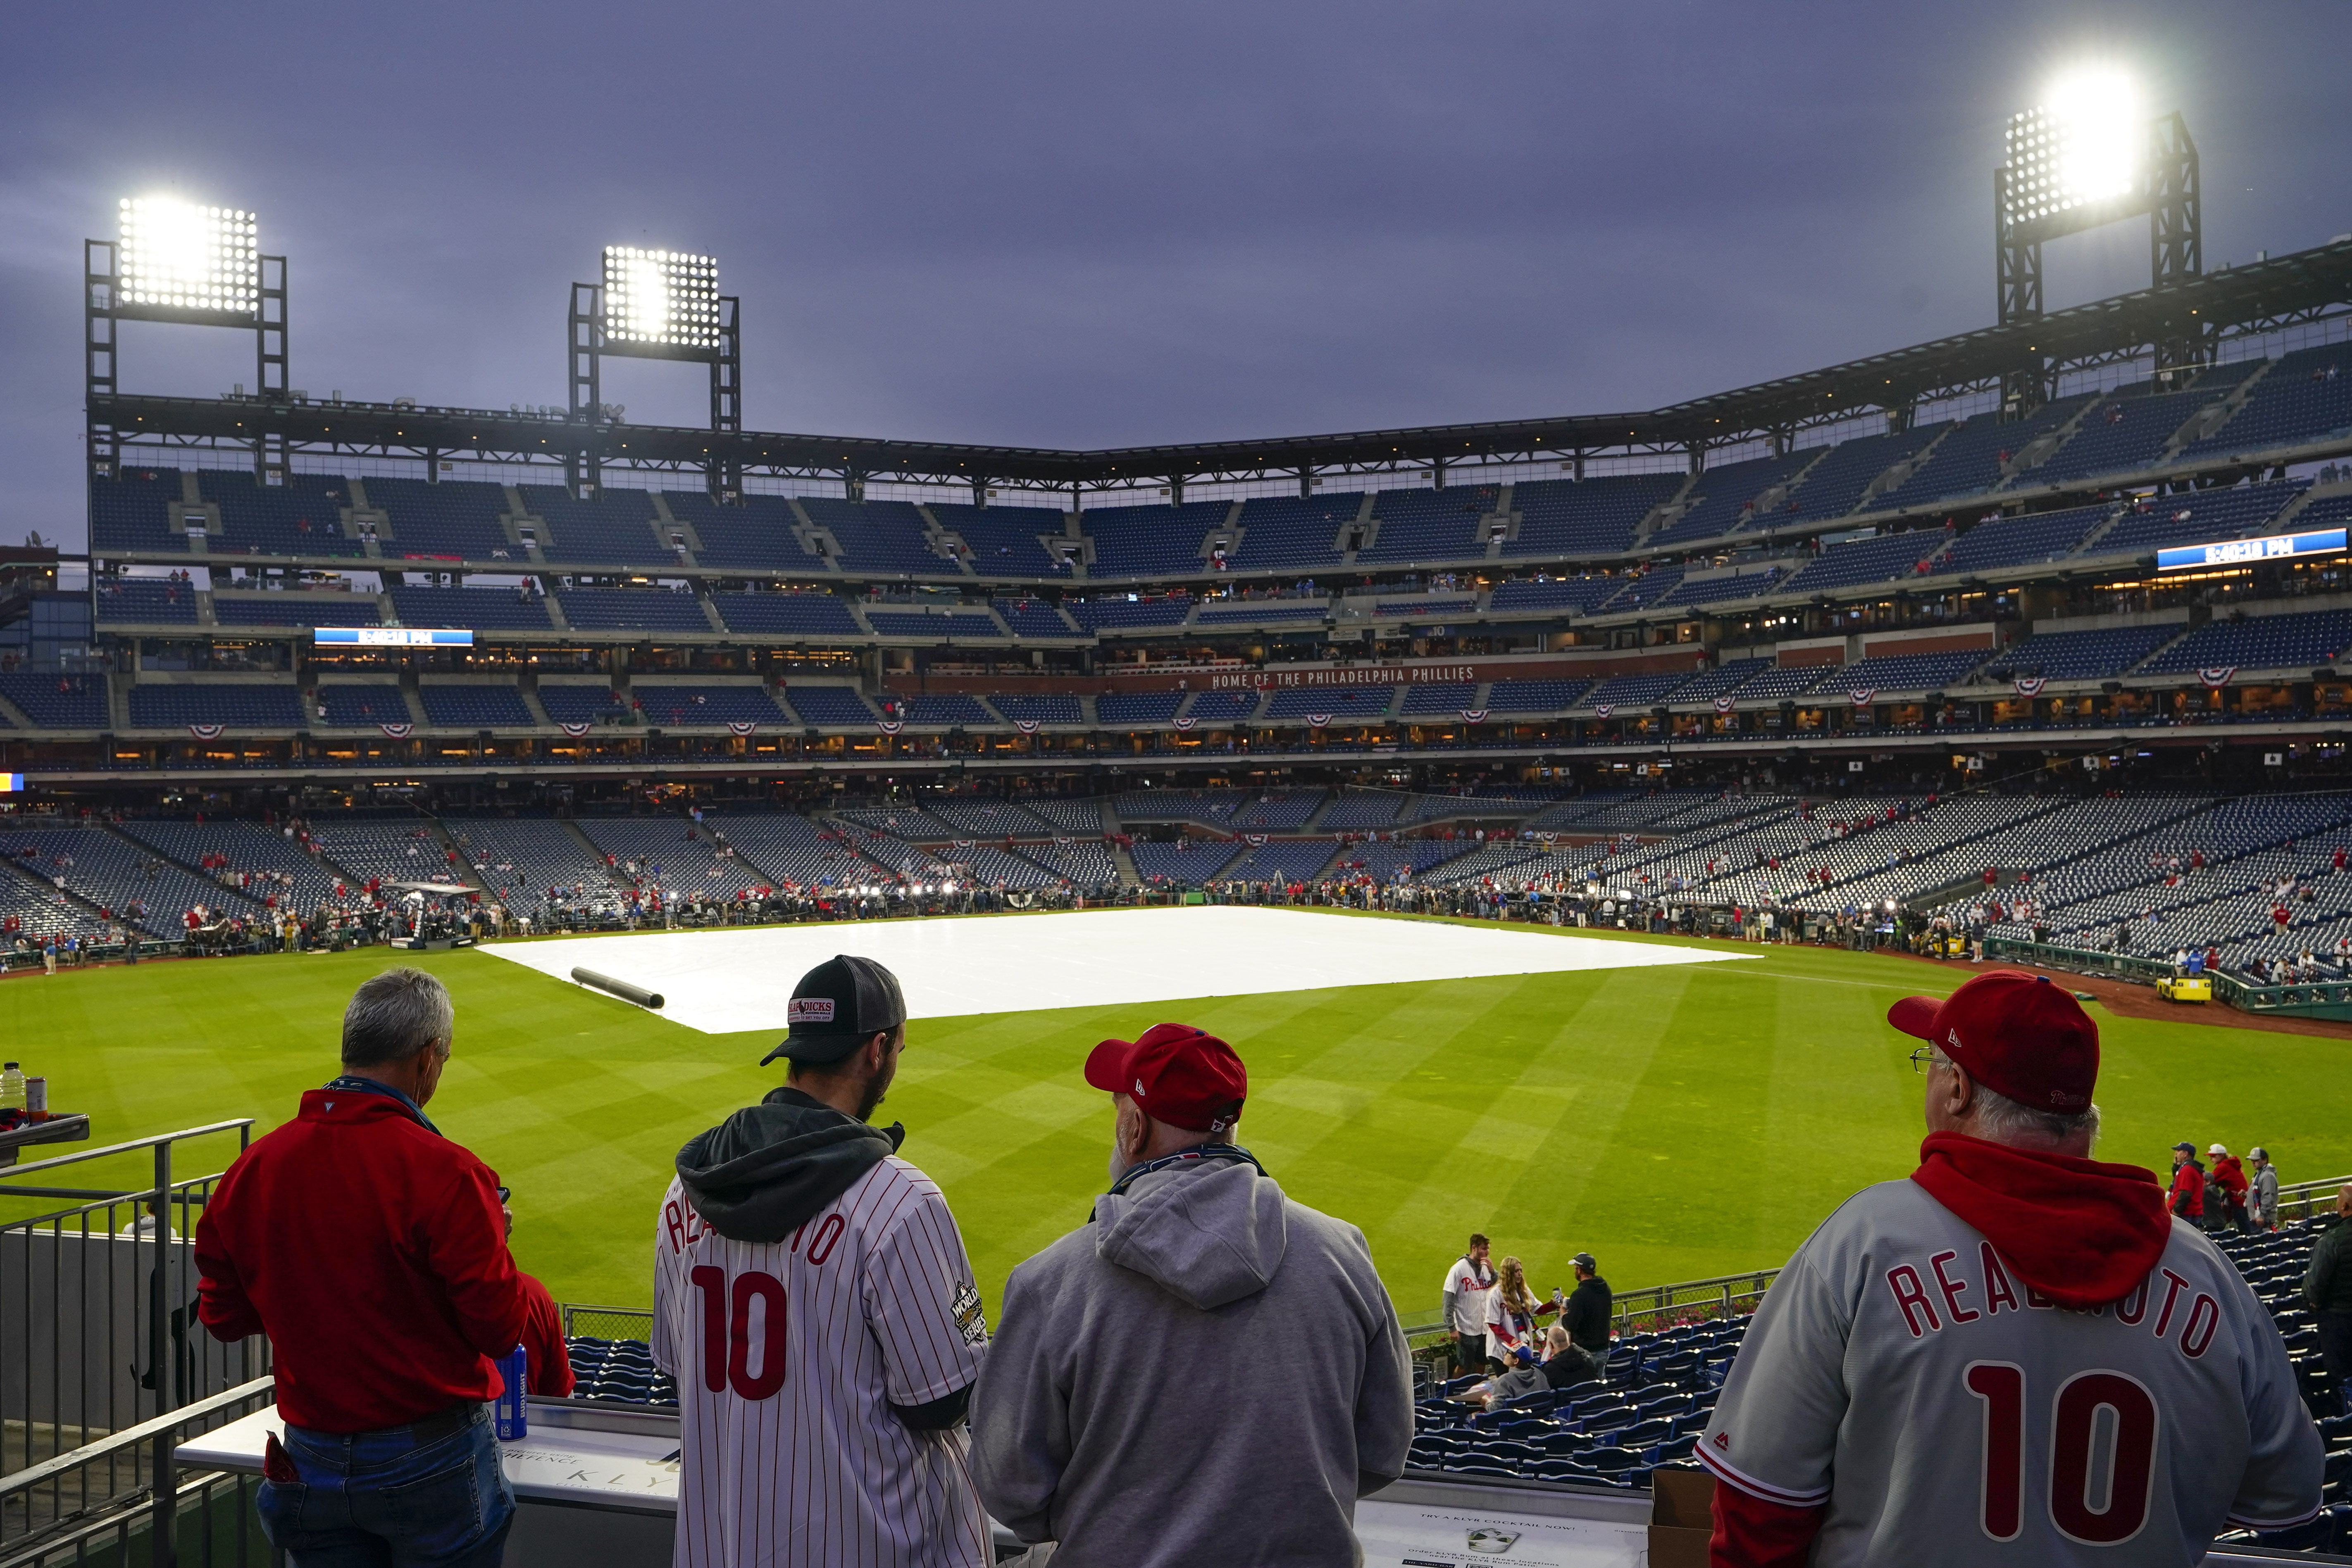 Phillies Pride and Fashion at Citizens Bank Park - Philly PR Girl